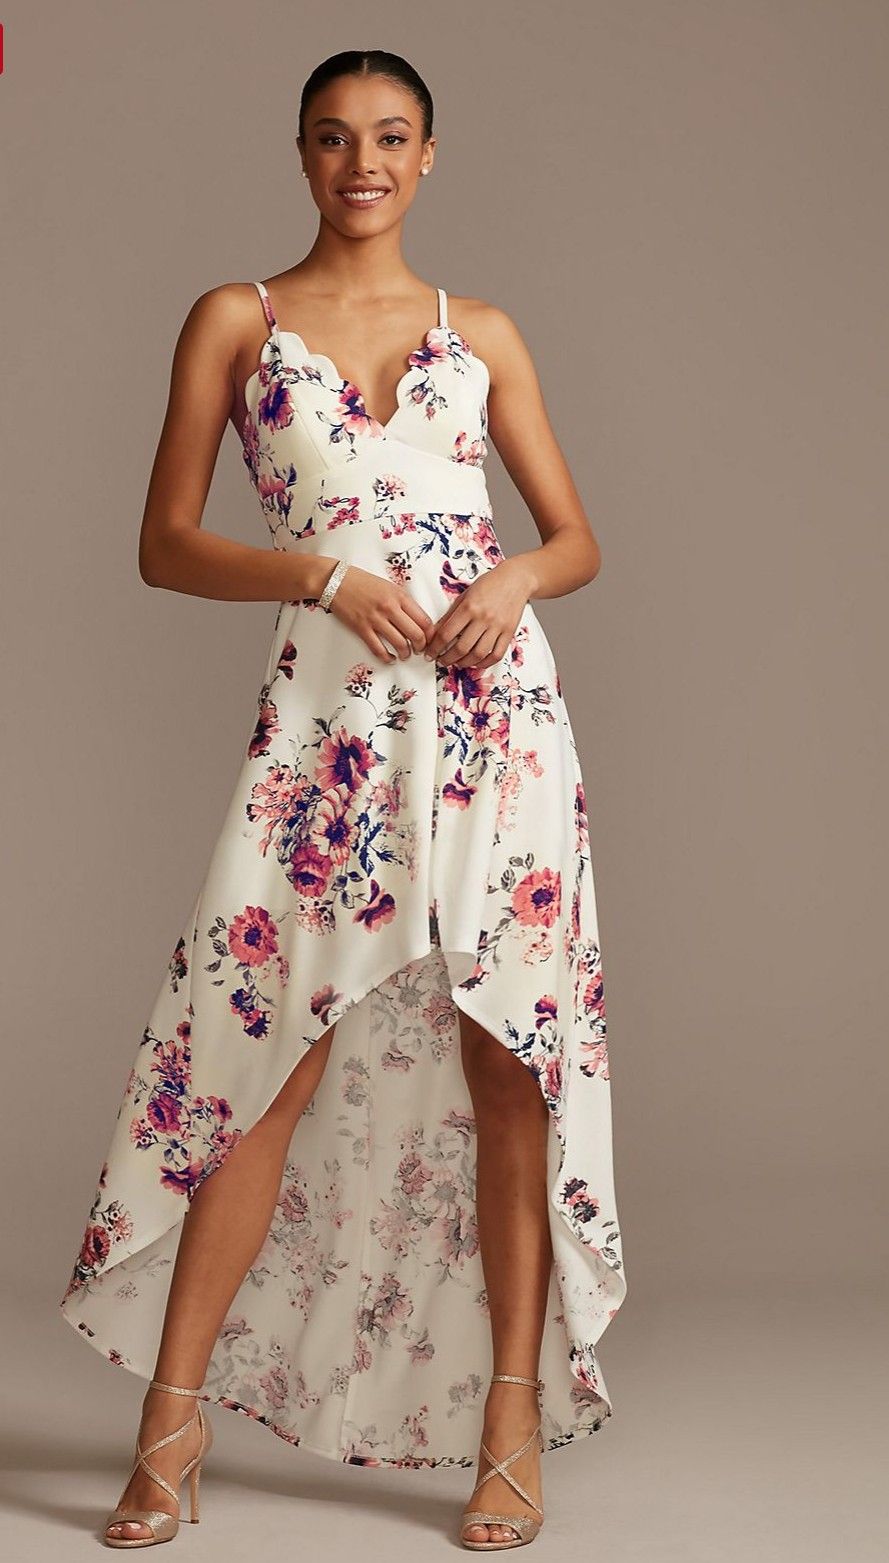 Scalloped Spaghetti Strap High/Low Floral Dress